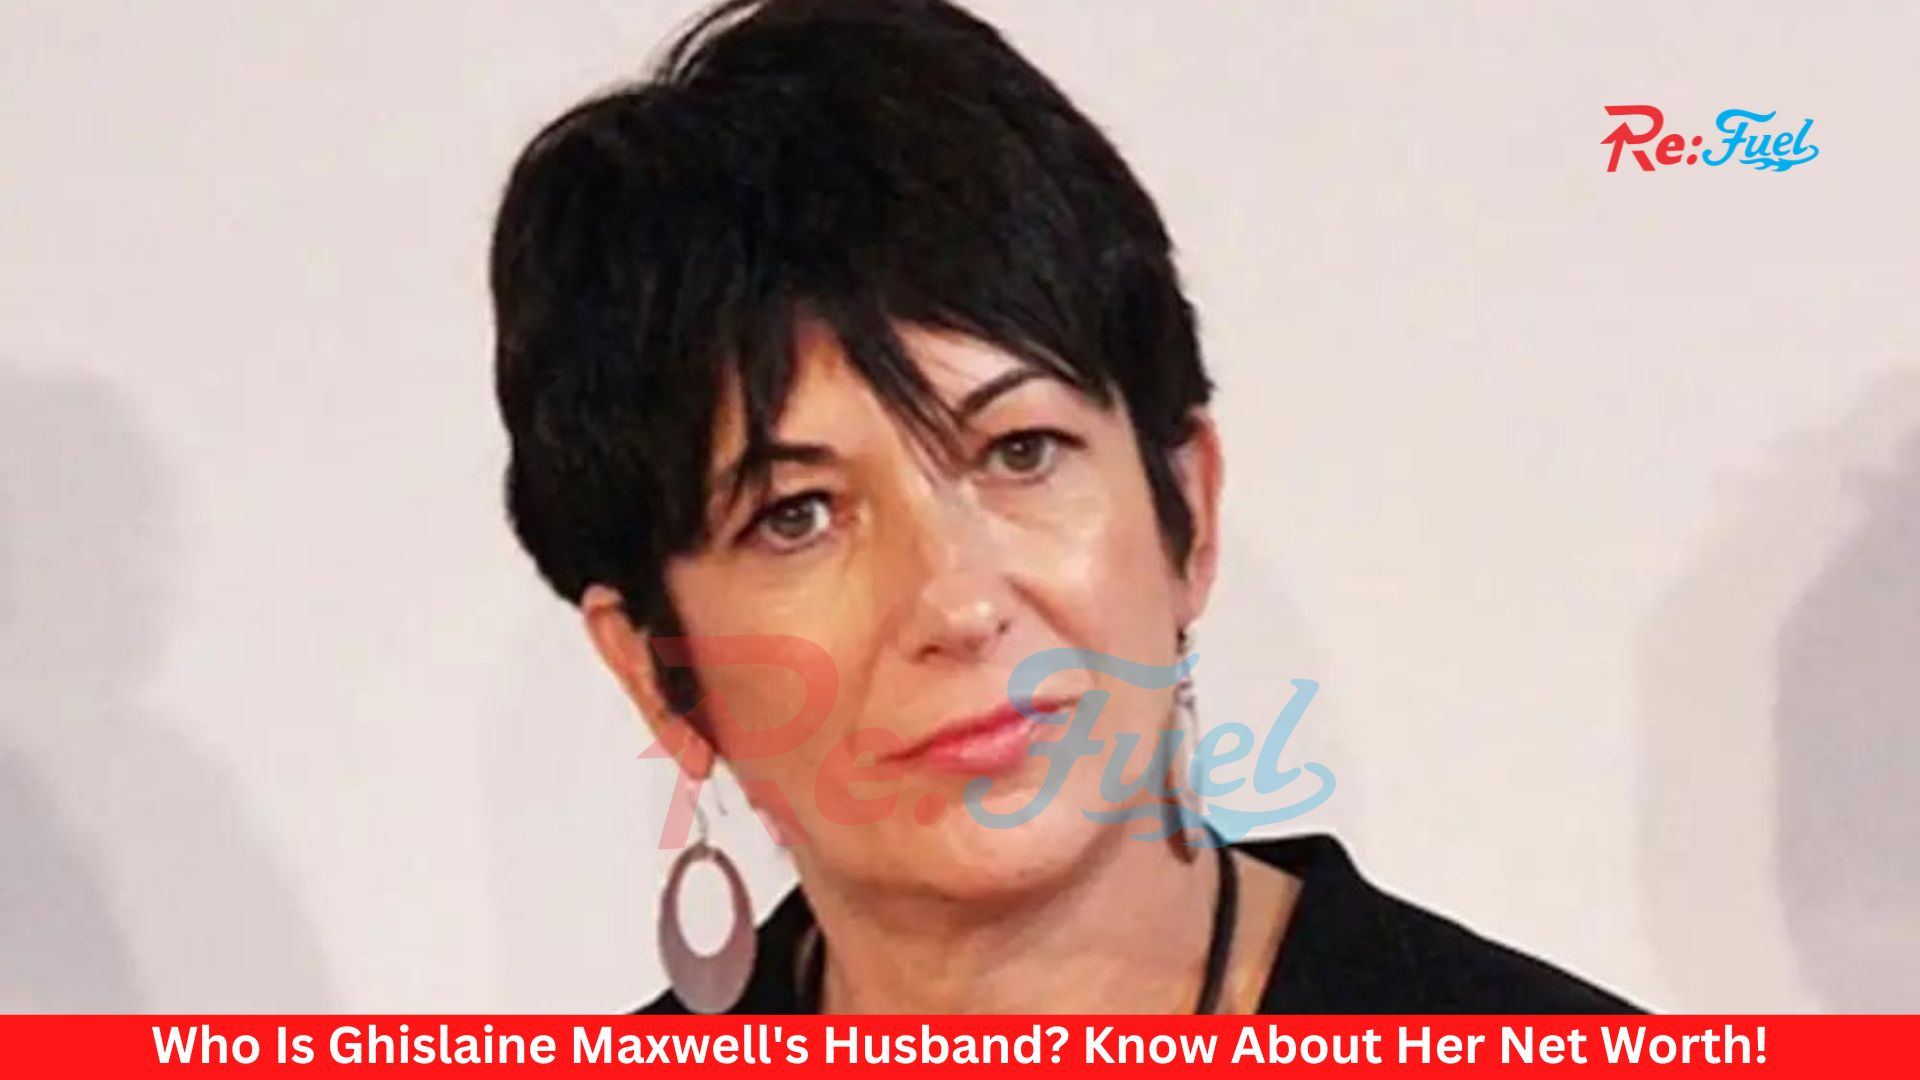 Who Is Ghislaine Maxwell's Husband? Know About Her Net Worth!